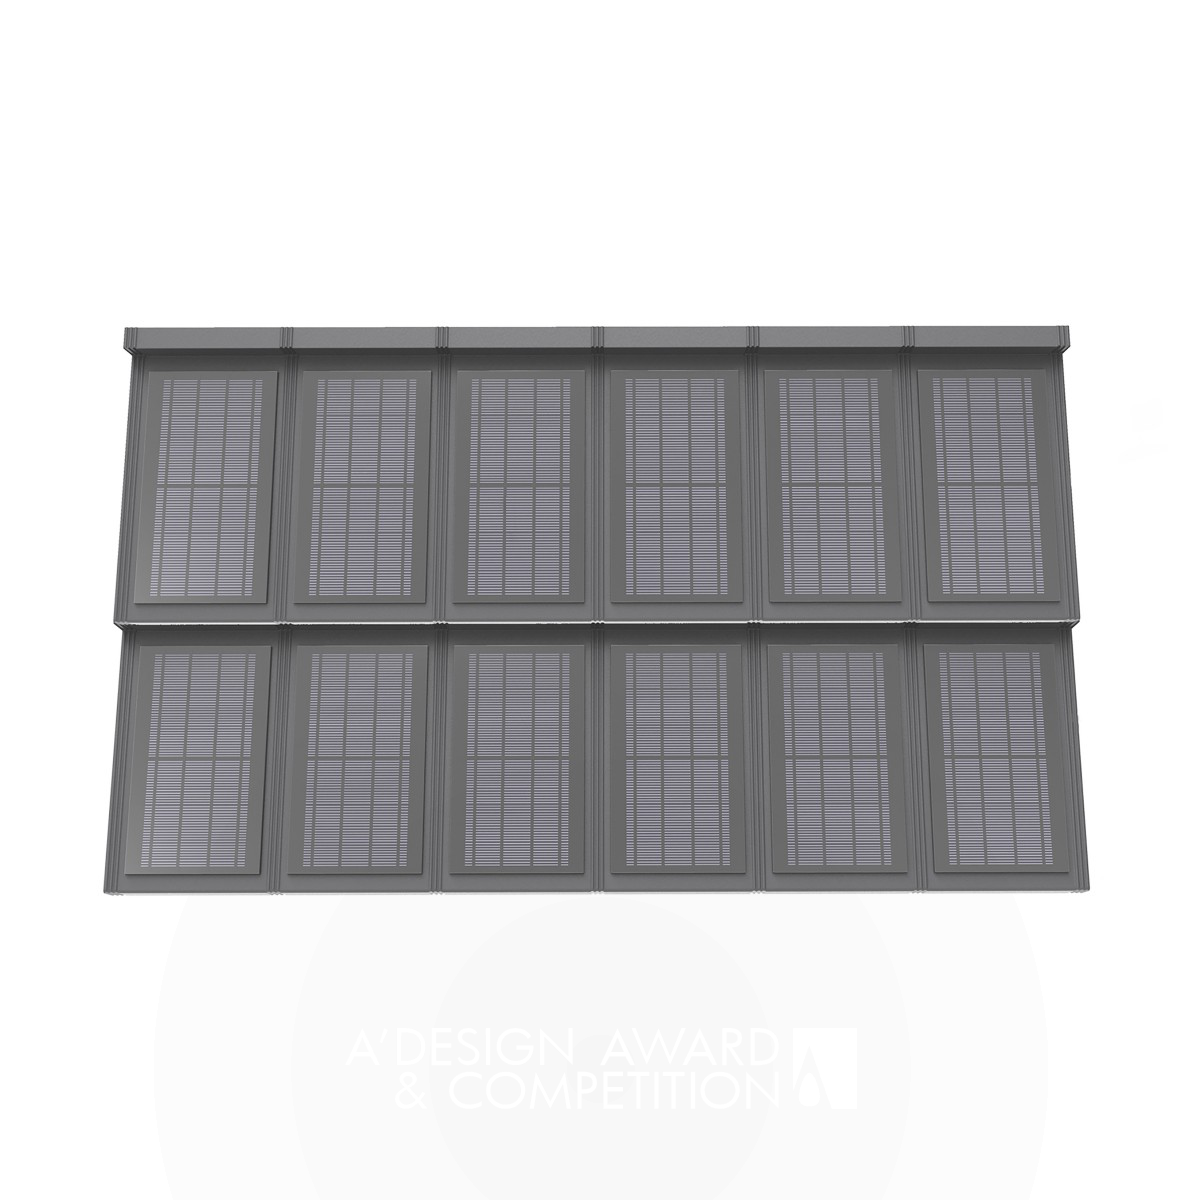 Etile Photovoltaic Metal Roof